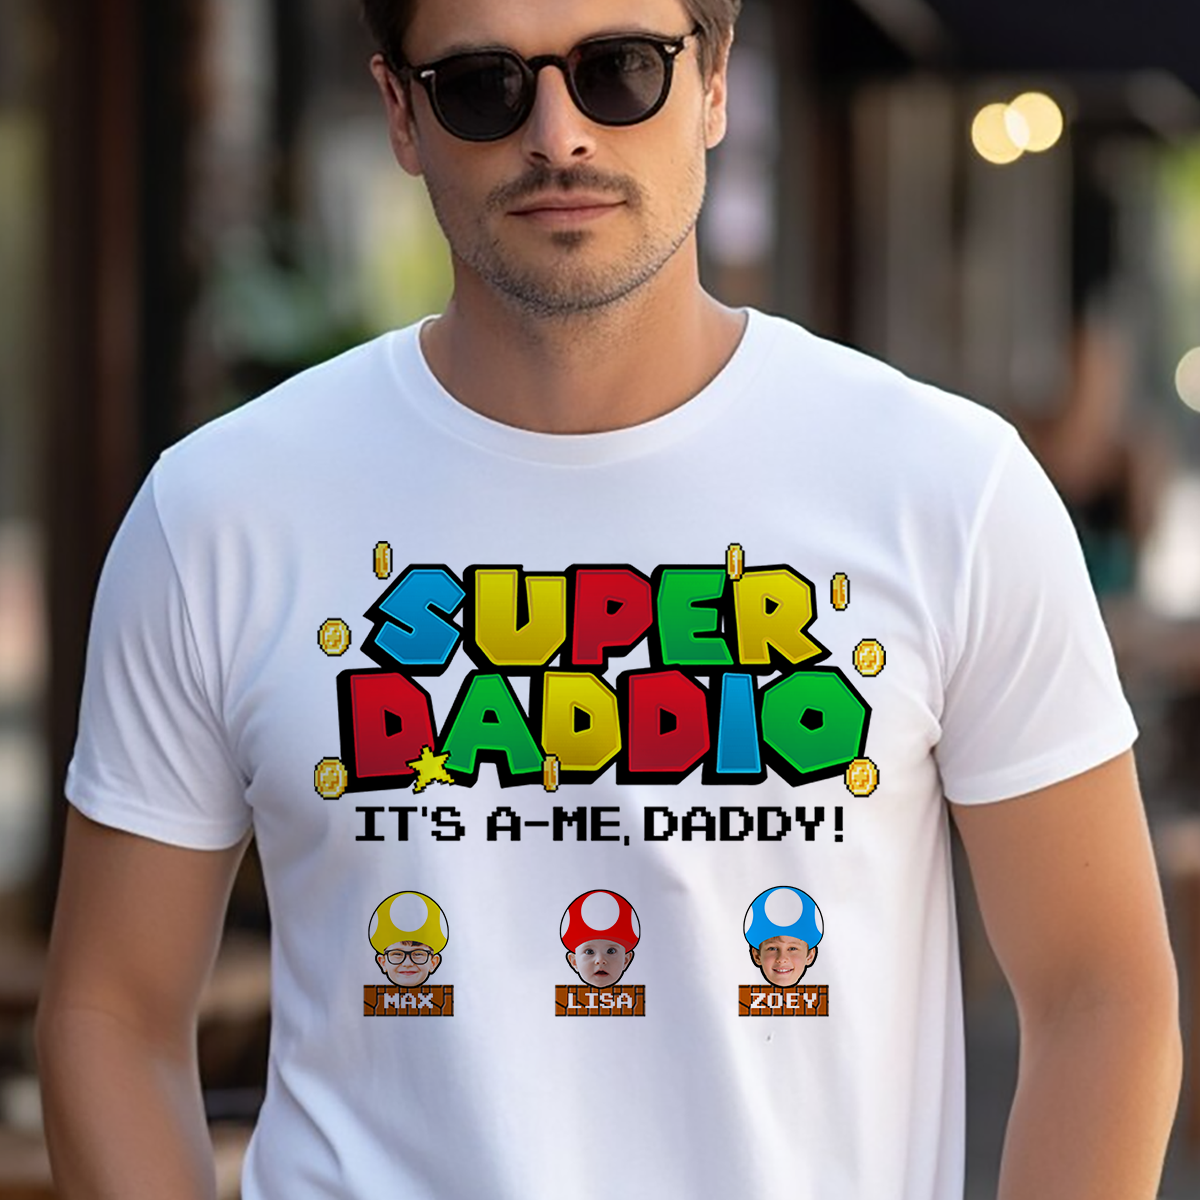 Super Daddio - Family Personalized Custom Unisex T-shirt, Hoodie, Sweatshirt - Father's Day, Birthday Gift For Dad